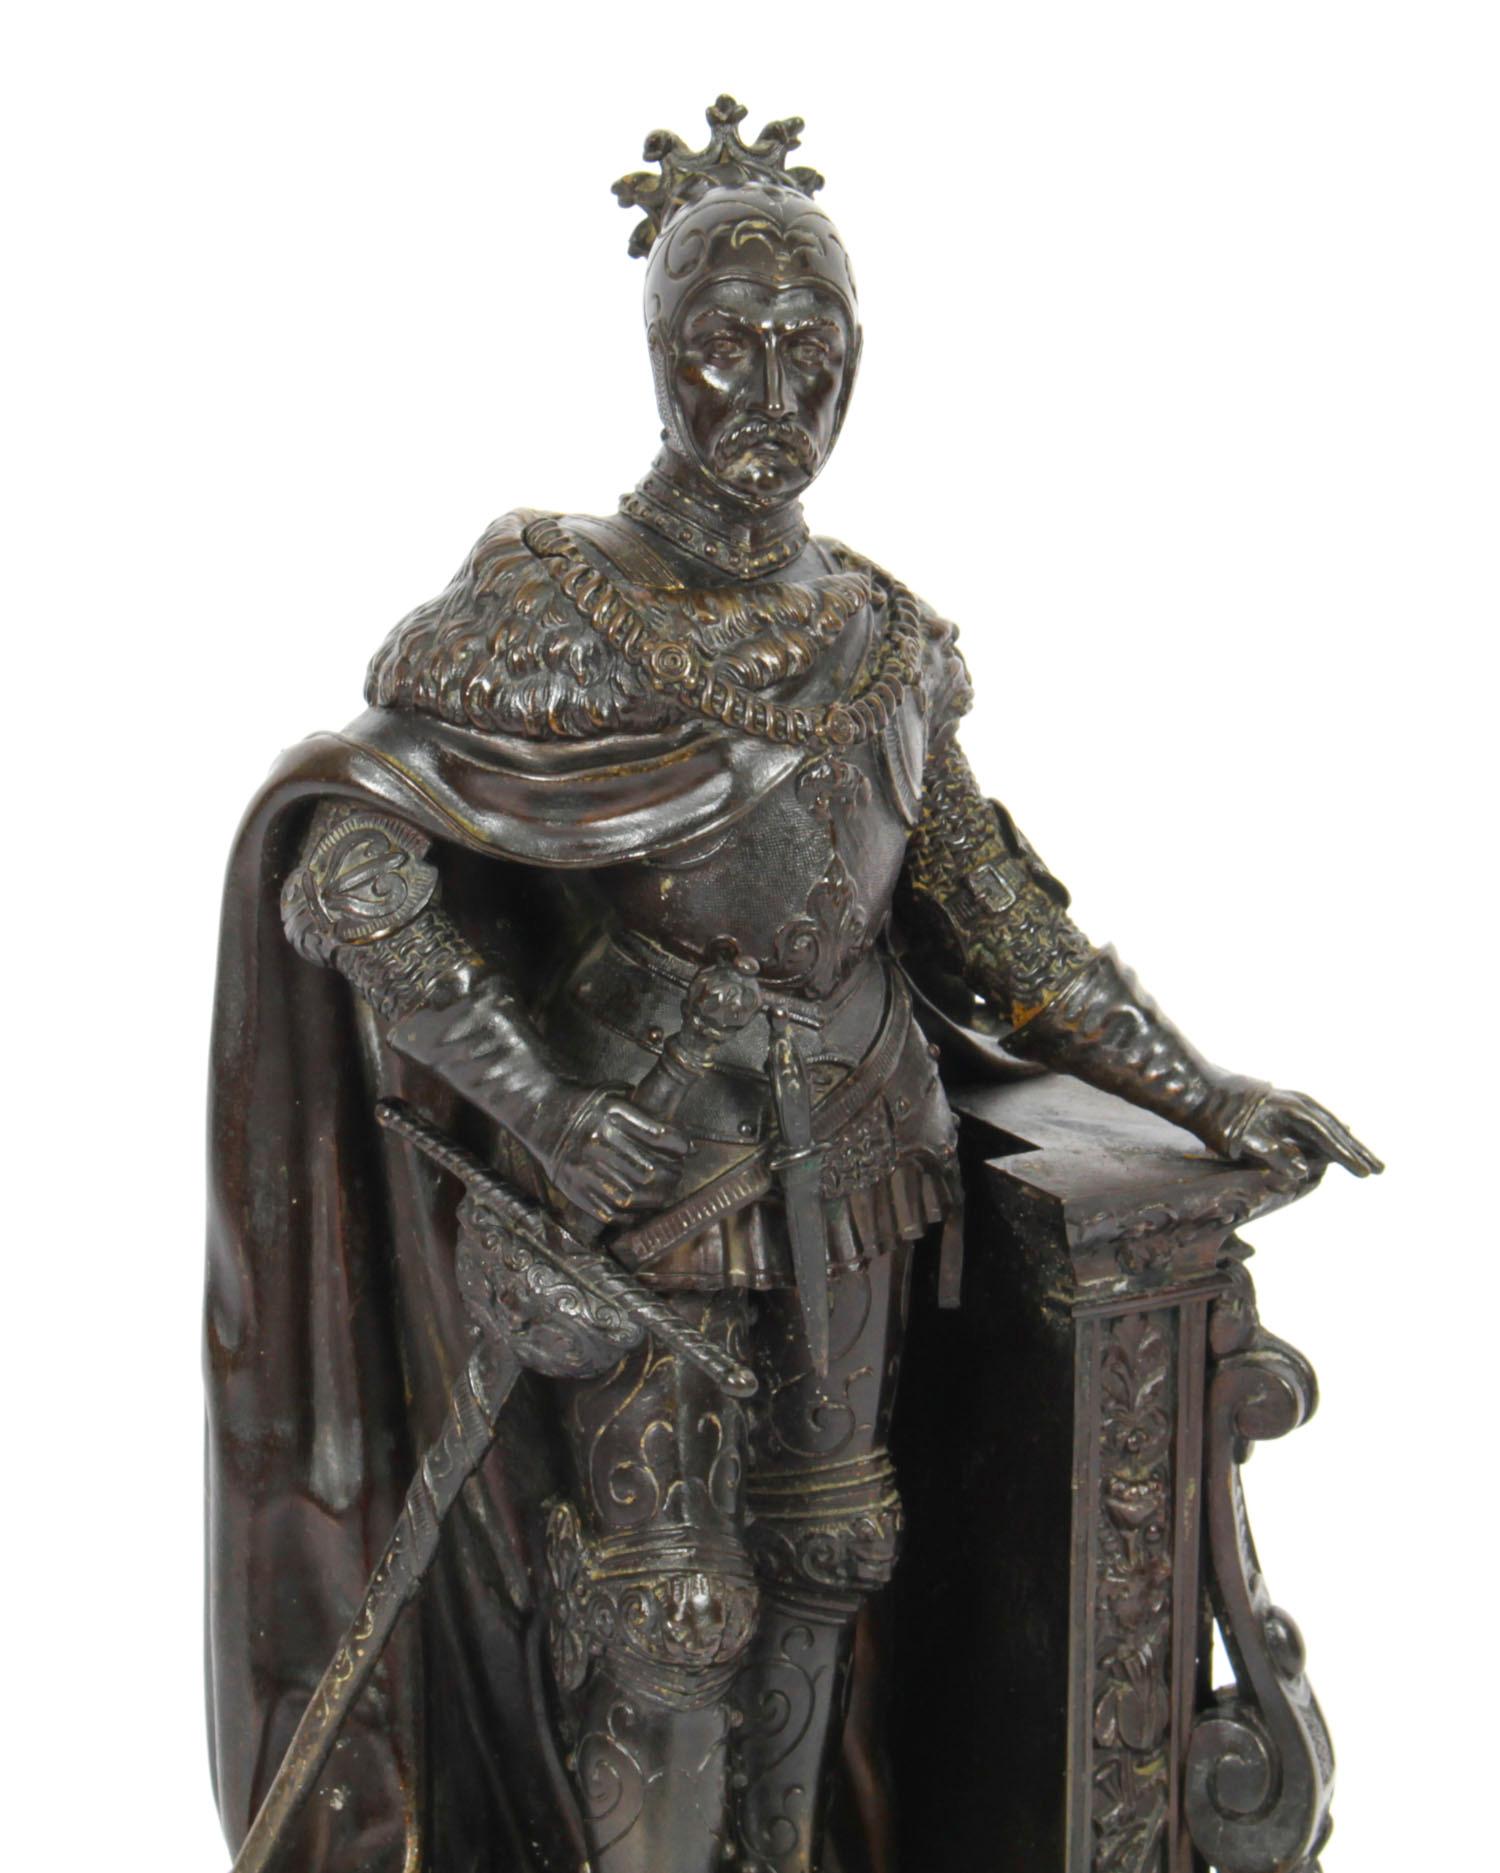 This is a wonderful antique French bronze and malachite sculpture of a warrior, Circa 1850 in date.
 
The finely cast dark brown patinated bronze figure depicts a knight in armour with sword, the top of his helmet adorned with a crown.

The